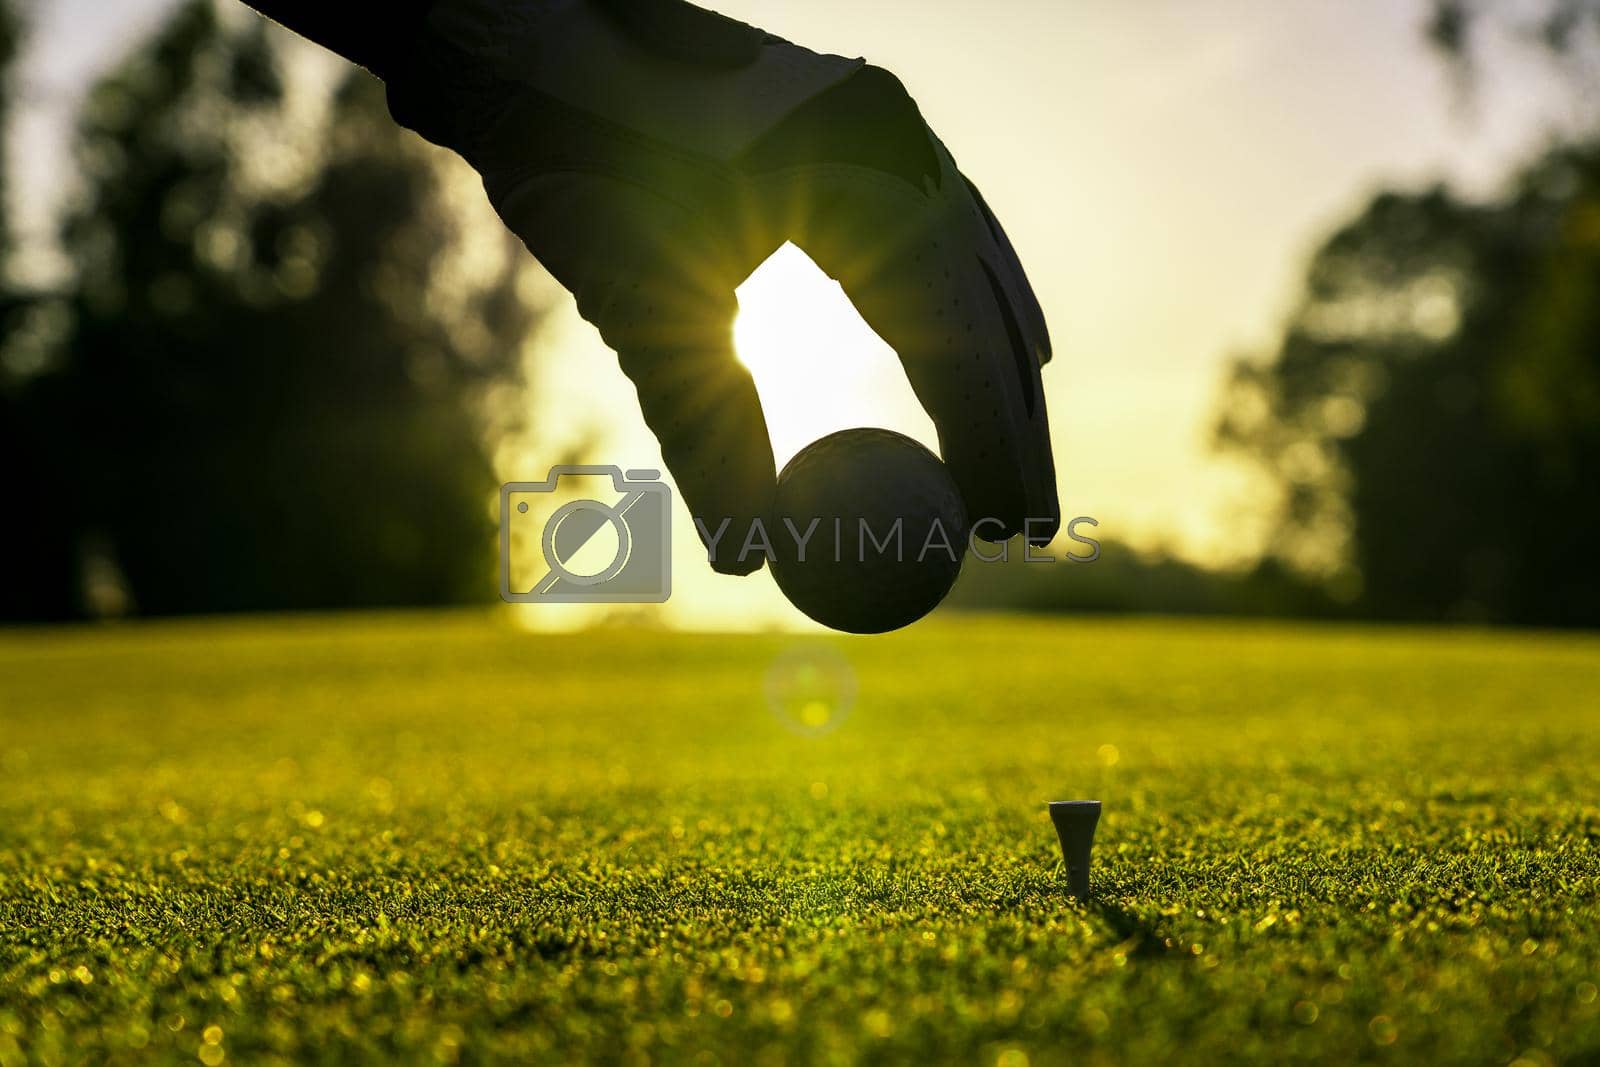 Royalty free image of Golfer wearing glove placing golf ball on a tee at golf course by sdf_qwe